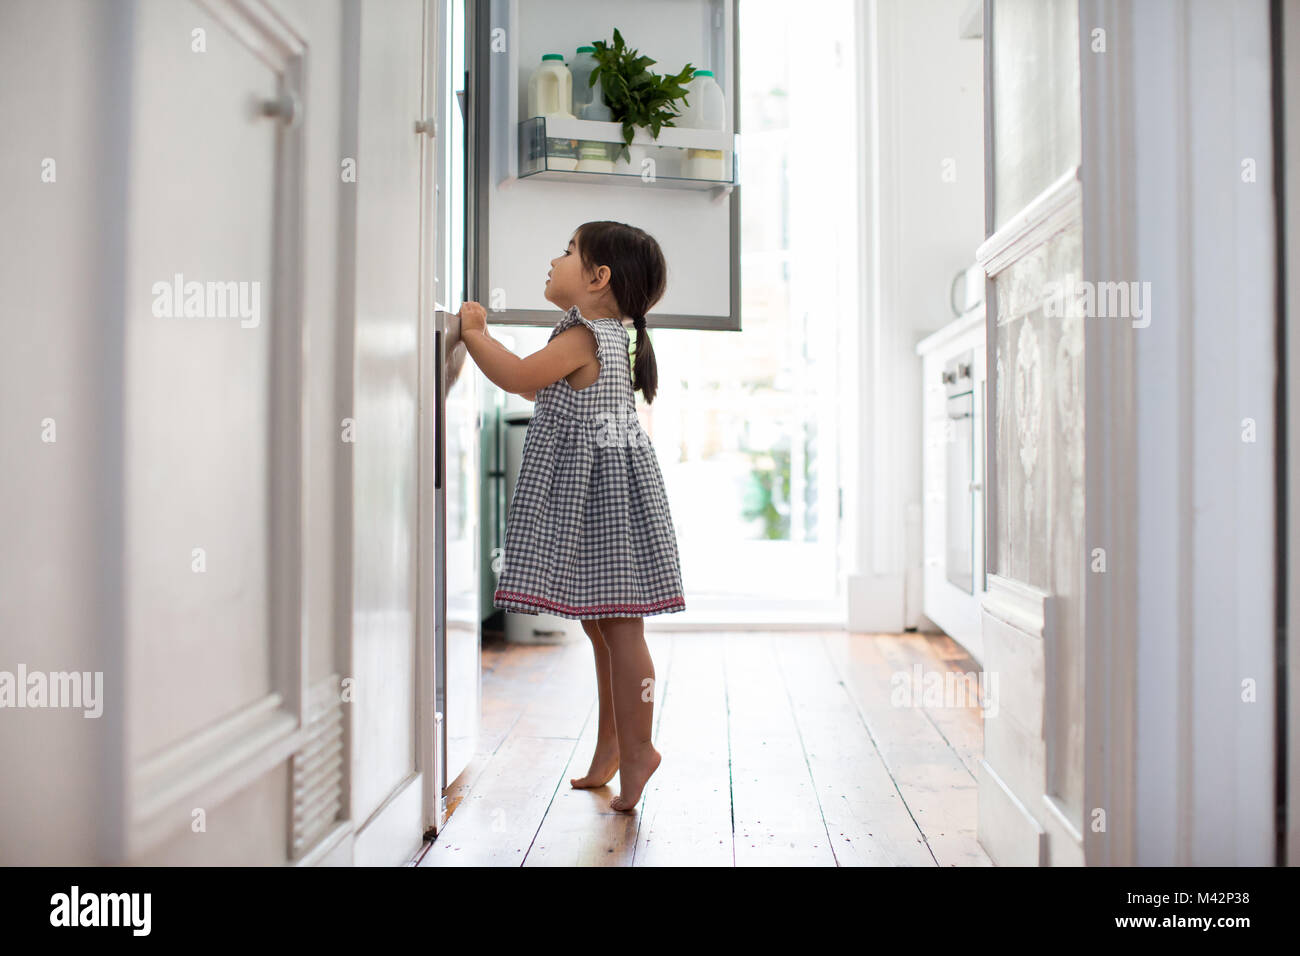 Girl standing on tip toes to look into refrigerator Stock Photo